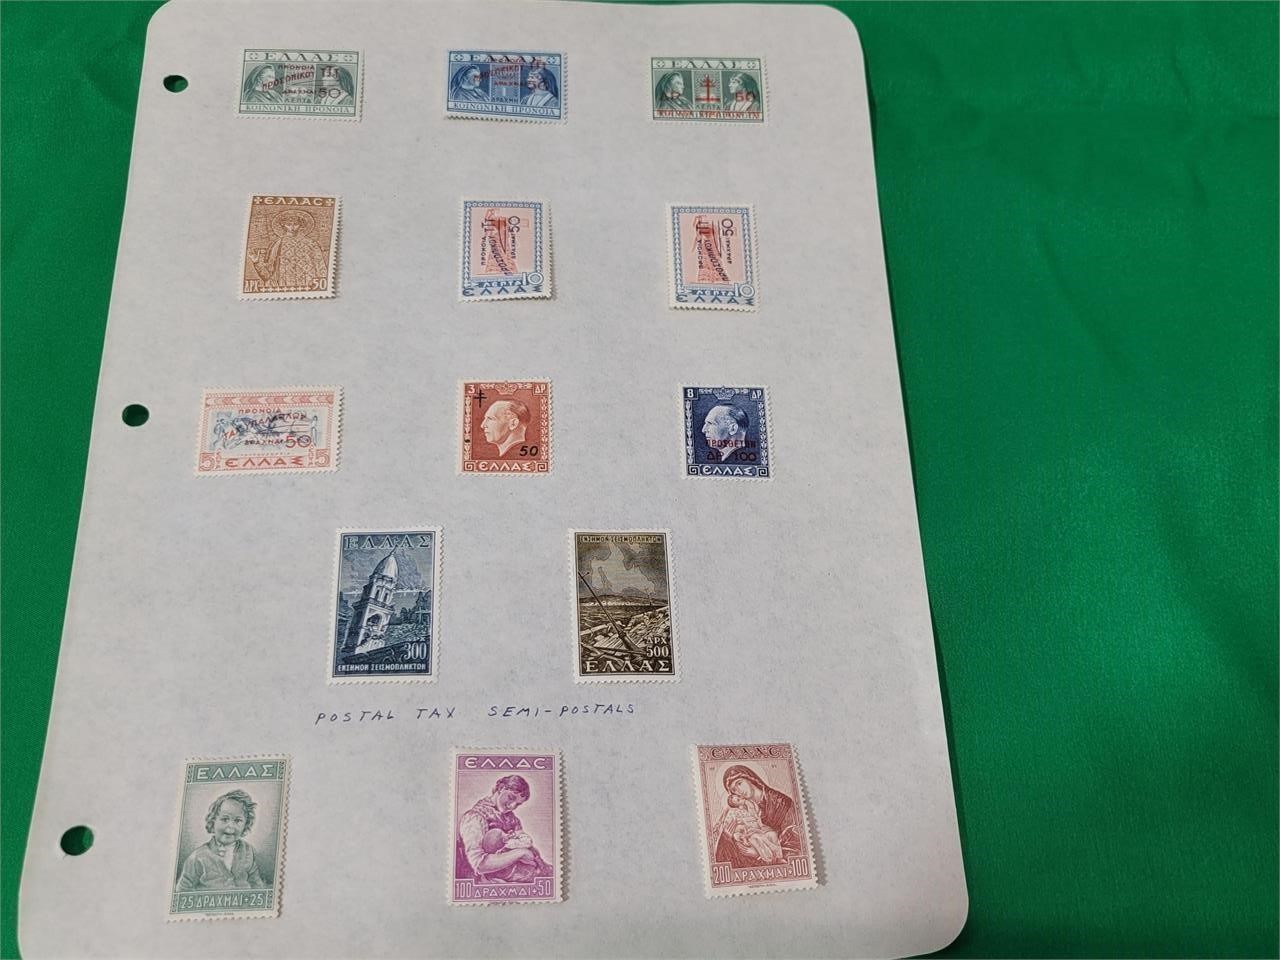 MHA May 9th Collectable Stamp Auction